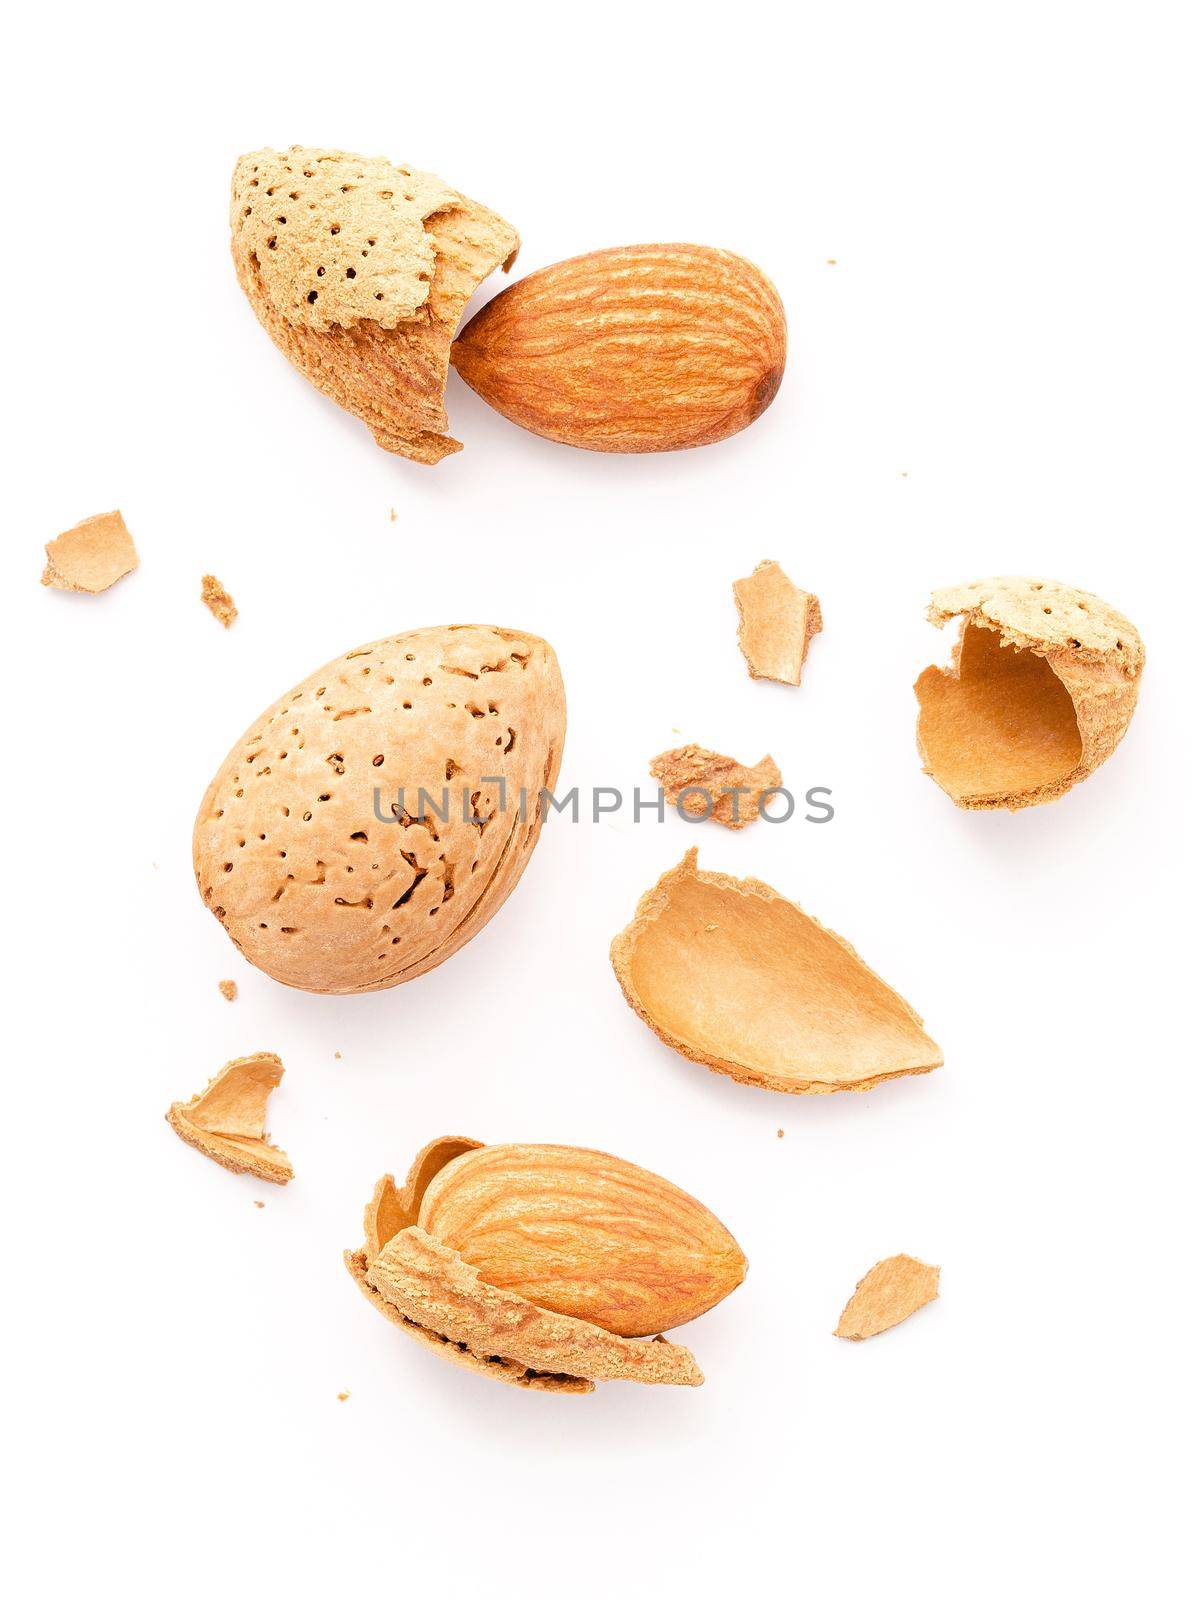 Close up group of almonds nut with shell  and cracked almonds shell isolated on white background. by kerdkanno